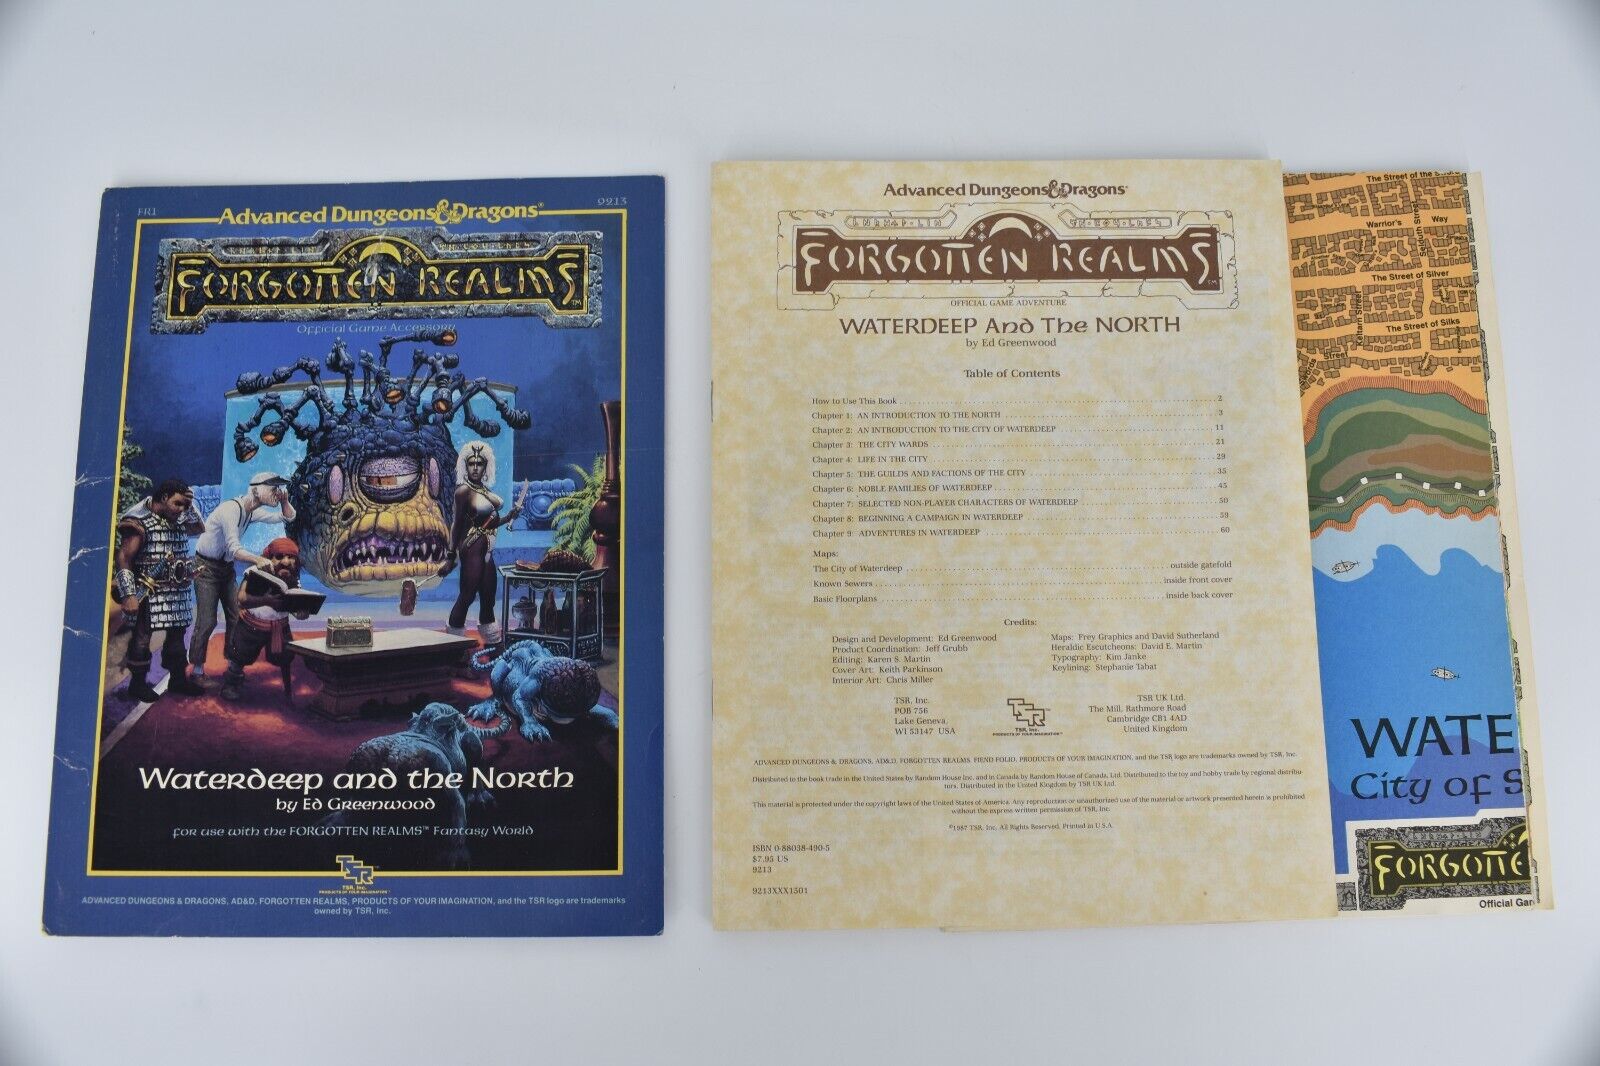 WATERDEEP AND THE NORTH AD&D Forgotten Realms Fantasy Roleplaying FR1 9213